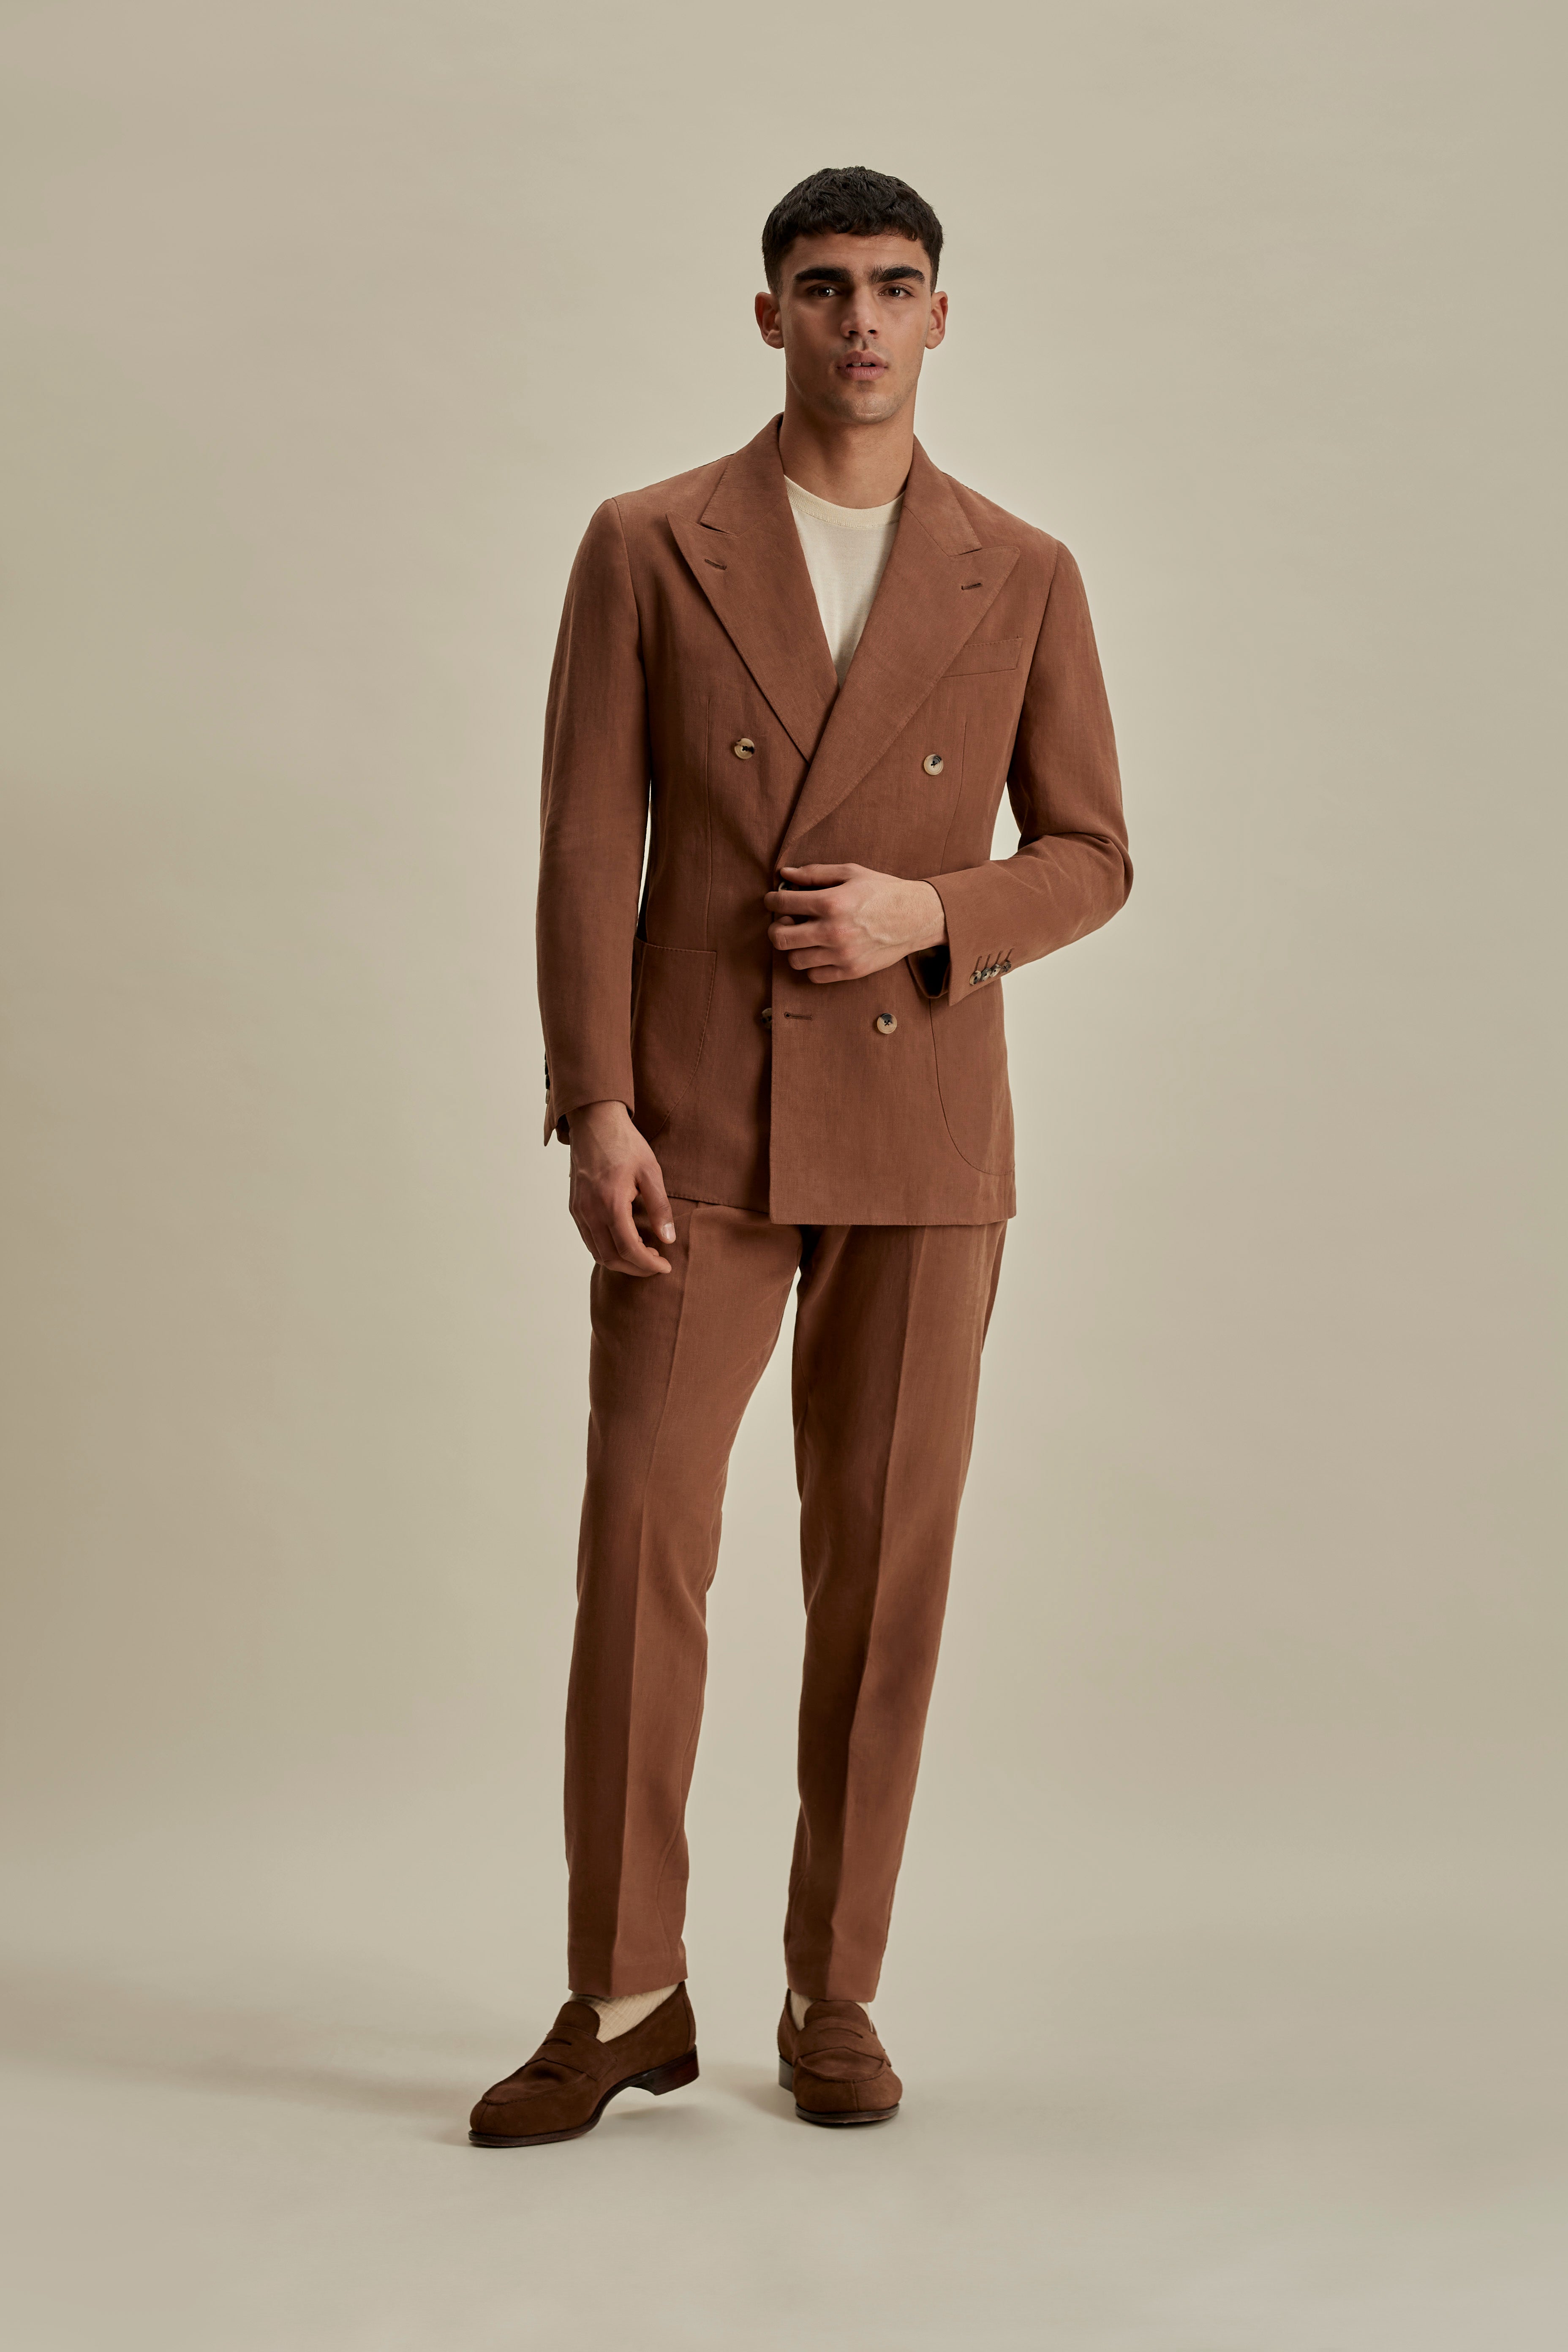 Linen Unstructured Double Breasted Peak Lapel Suit Terracotta Full Length Model Image